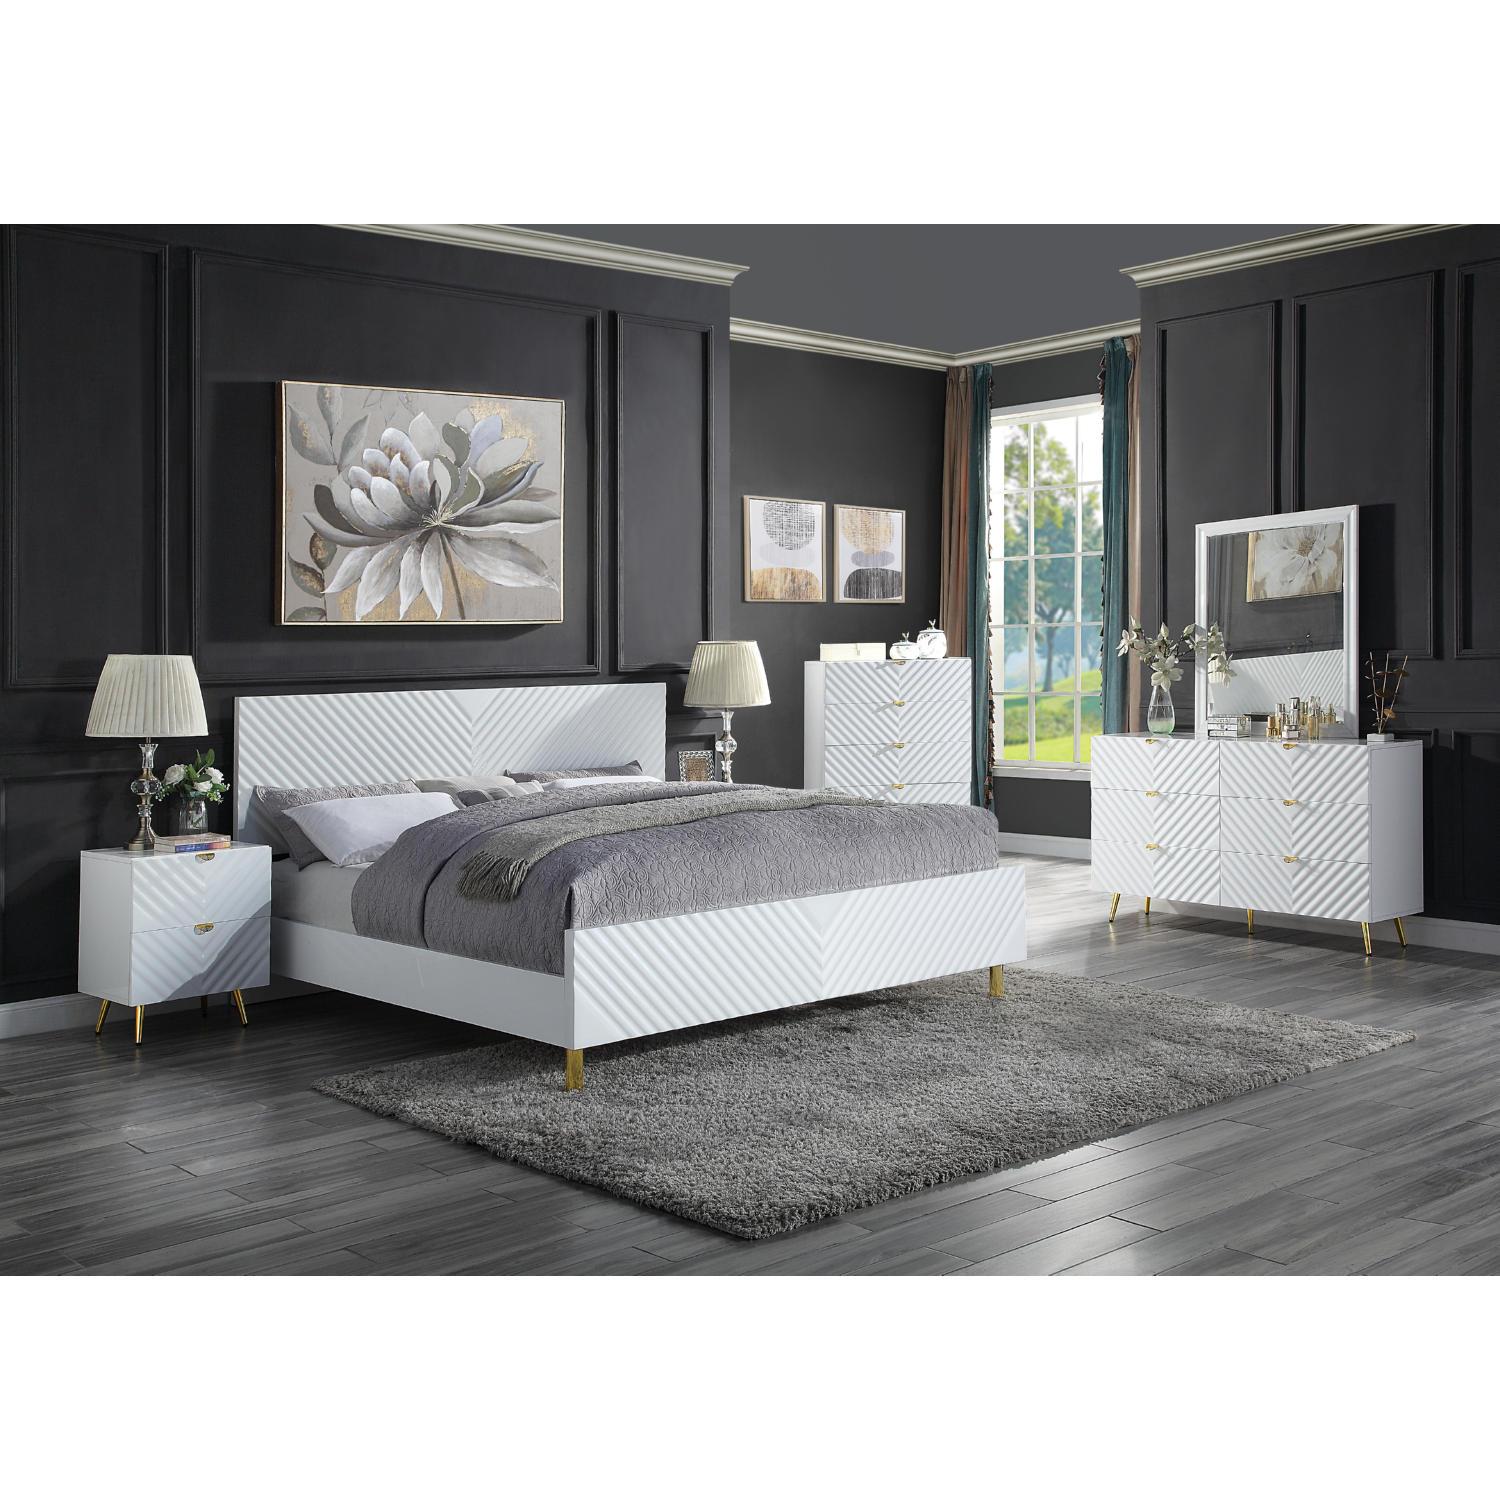 Modern, Casual Bedroom Set Gaines BD01034Q-5pcs in White 